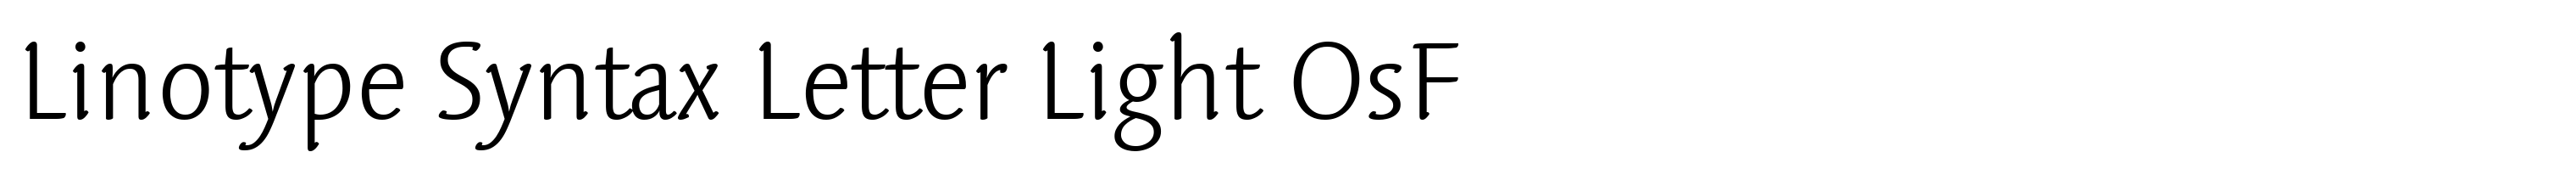 Linotype Syntax Letter Light OsF